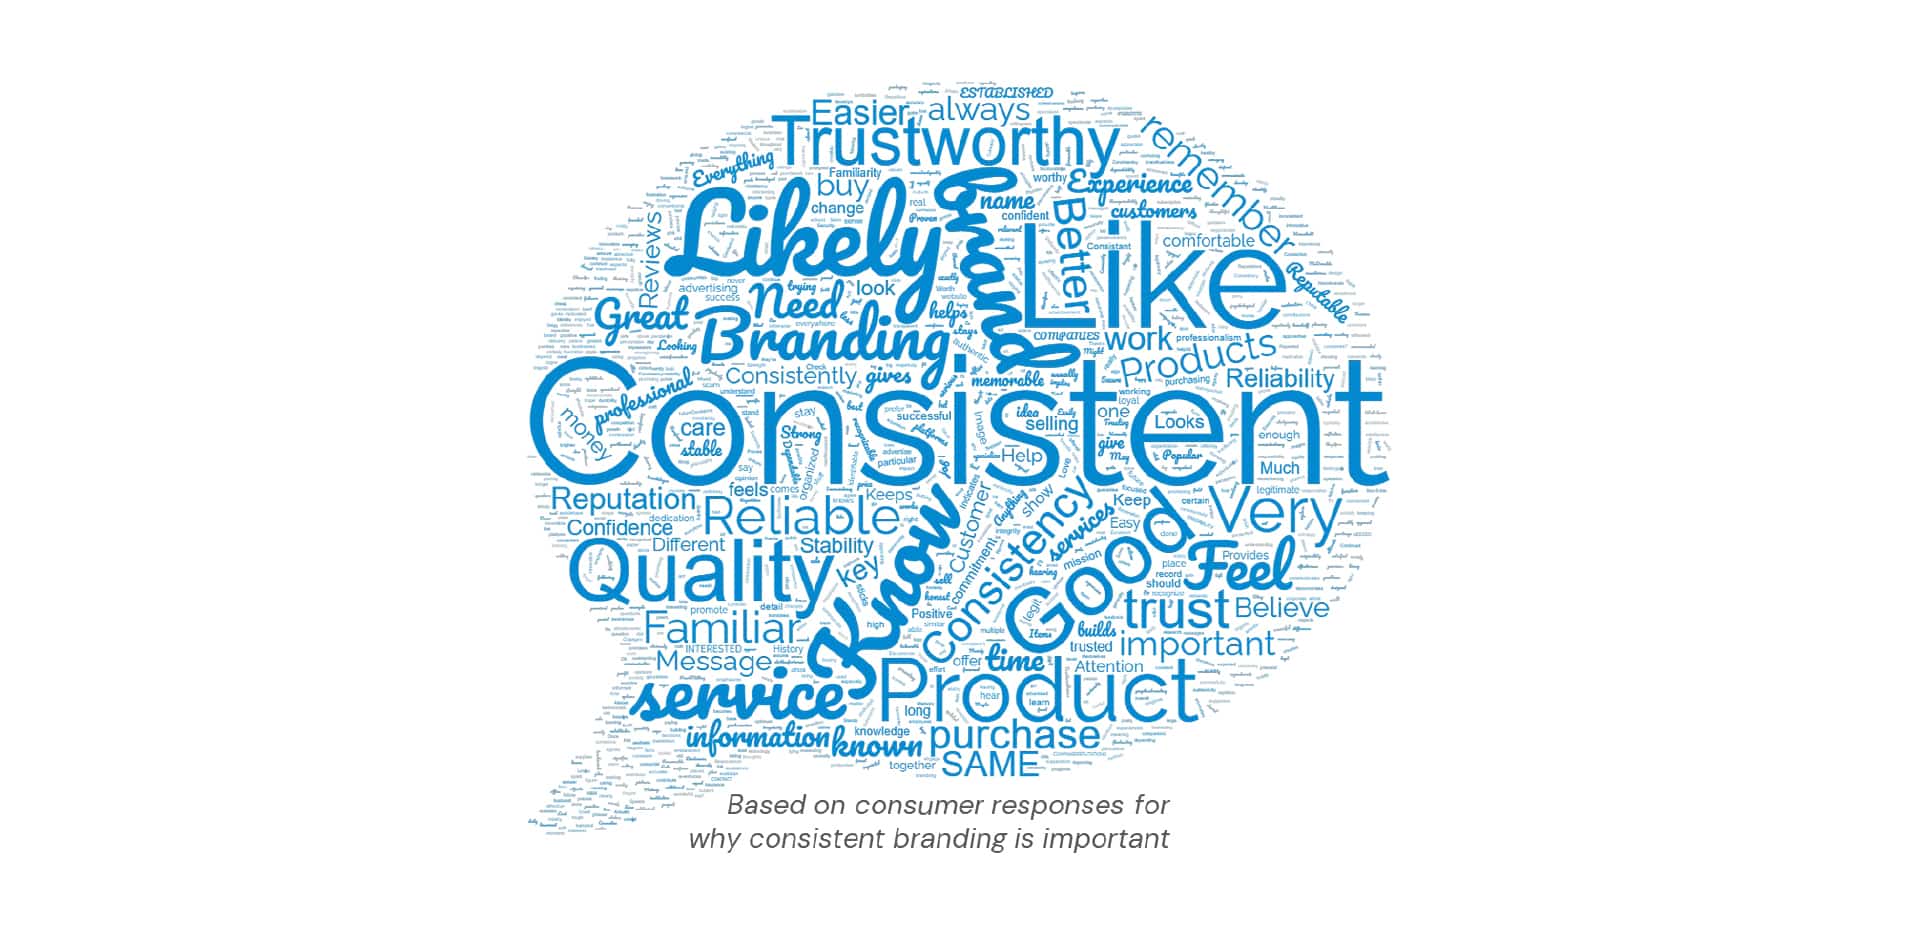 Survey respondents indicated reliability, quality, and trust as some of the biggest reasons why they would be more likely to purchase from a company with consistent branding.